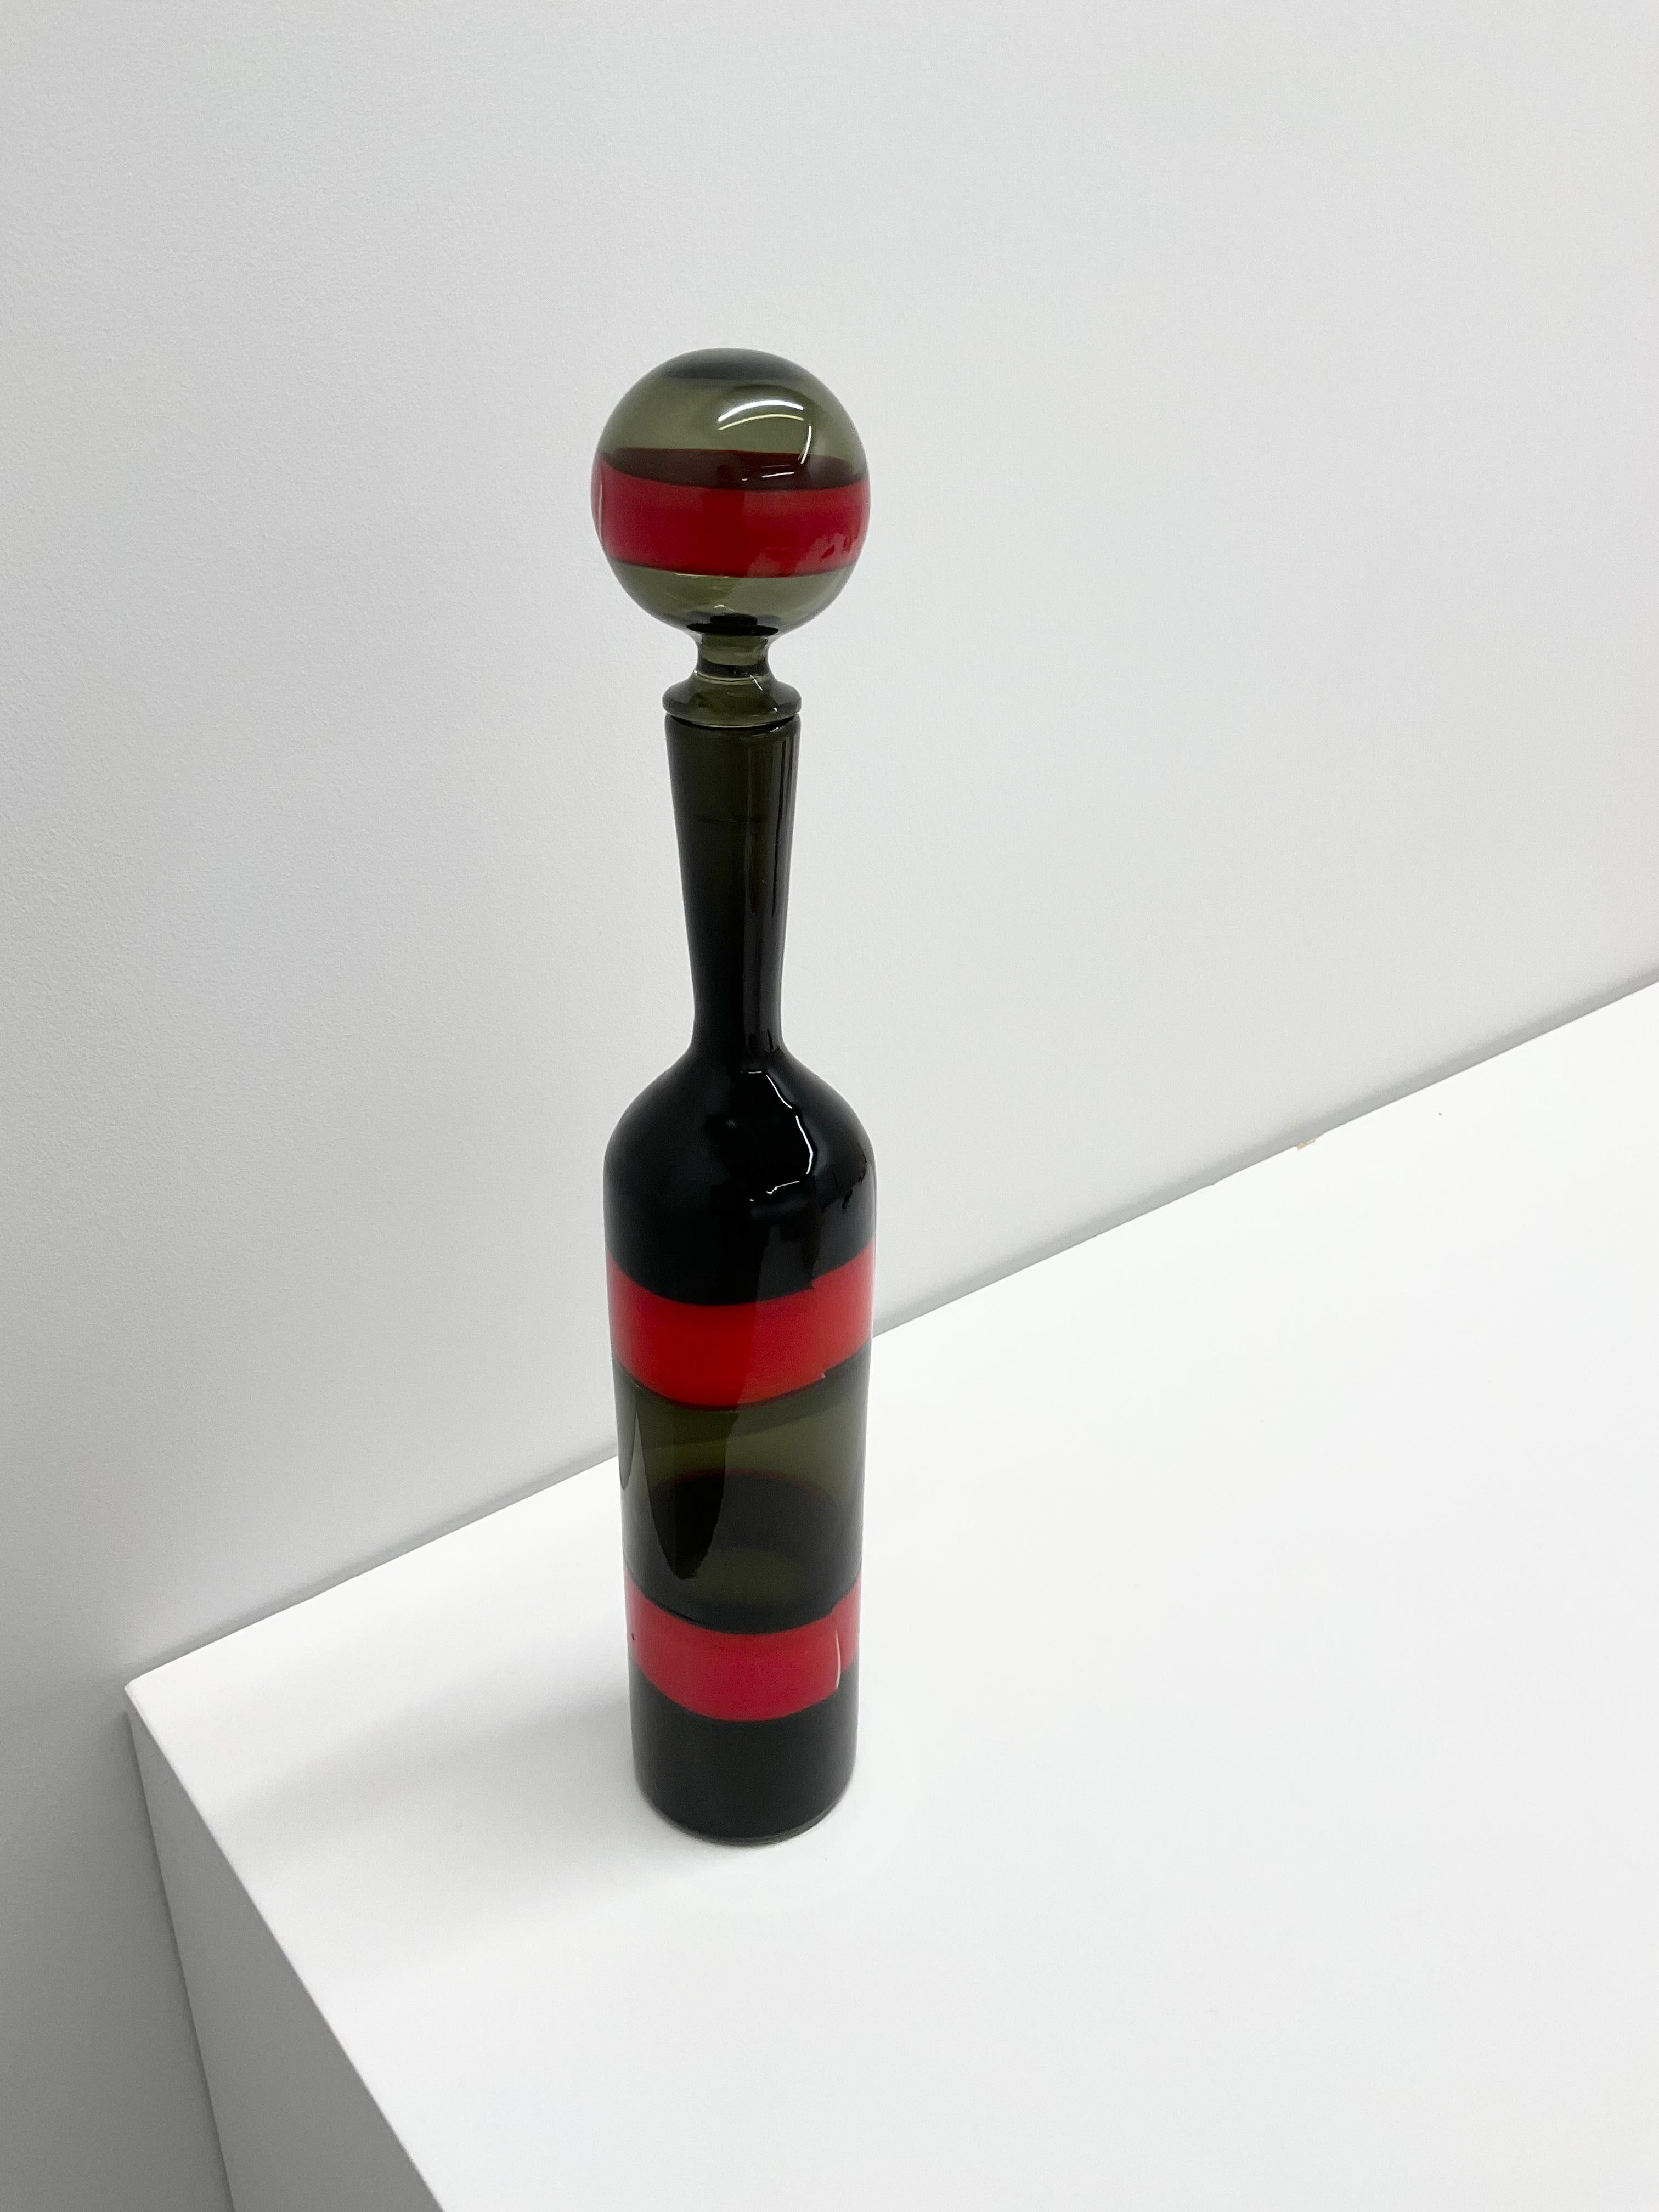 Fasce “Orizzontali” Stoppered Bottle by Fulvio Bianconi, 1960s In Excellent Condition For Sale In Skokie, IL